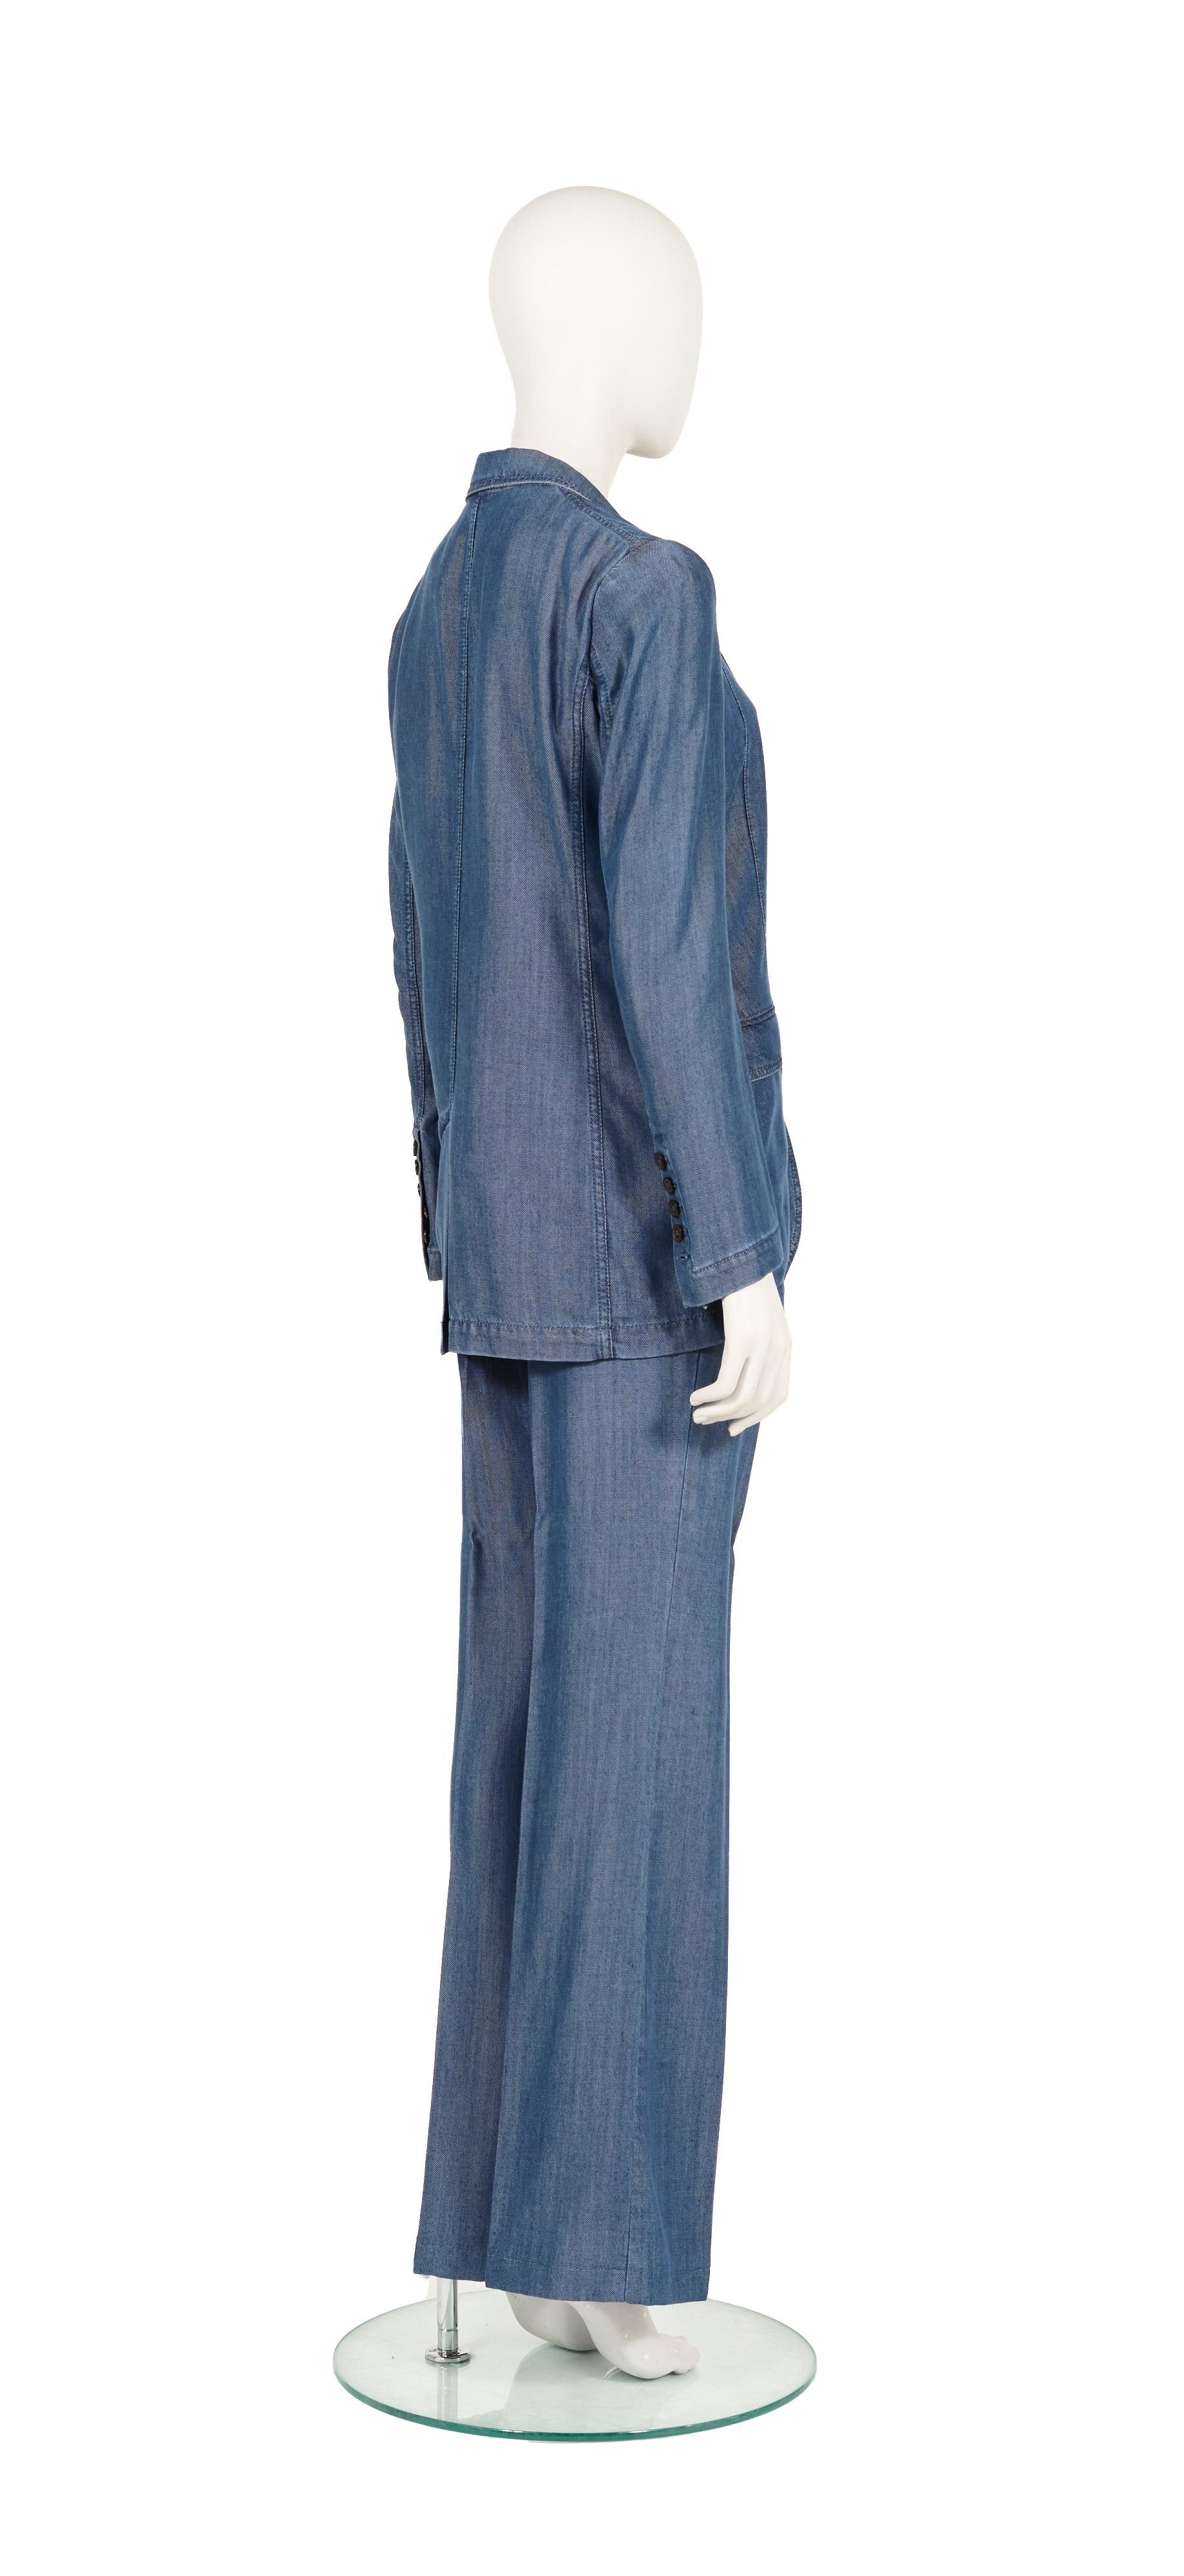 - Gucci by Frida Giannini
- Resort 2013 collection
- Denim pant suit
- Fitted single-breasted blazer
- Flared trousers
- Size: IT 40 (jacket), IT 44 (pants)